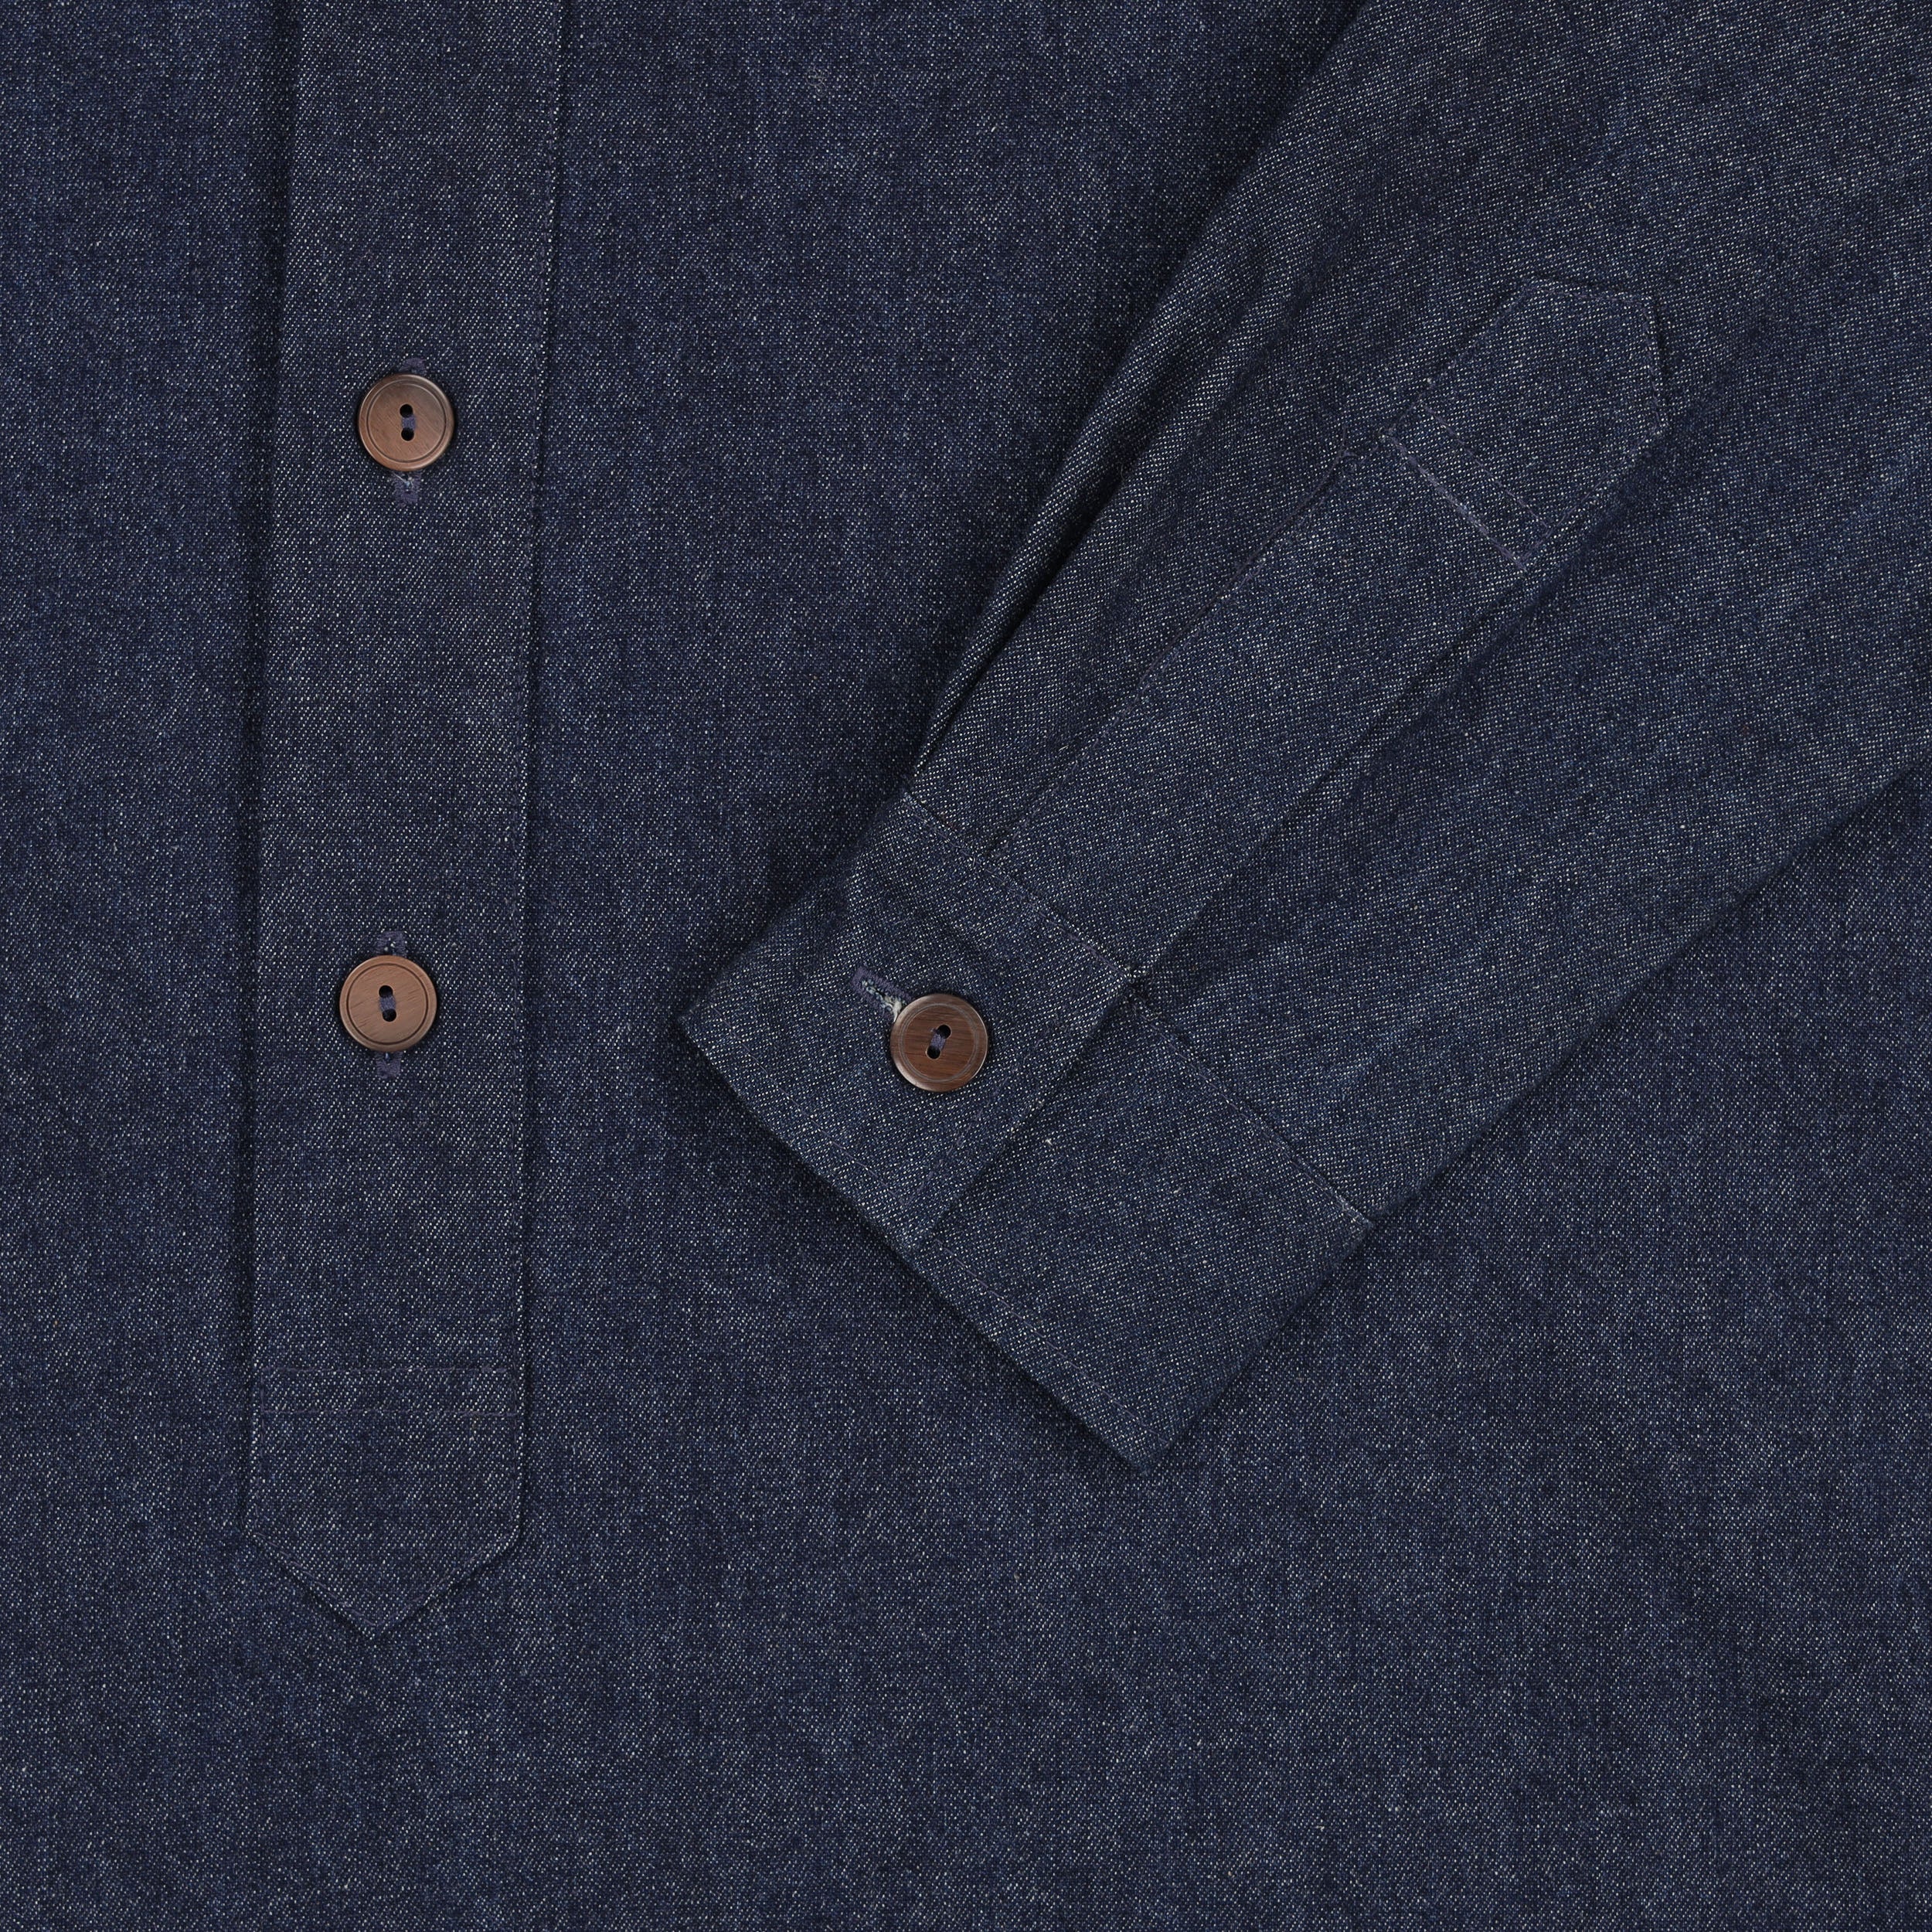 Close up of the button detail on the cuff and front of the Carrier Company Denim Work Shirt